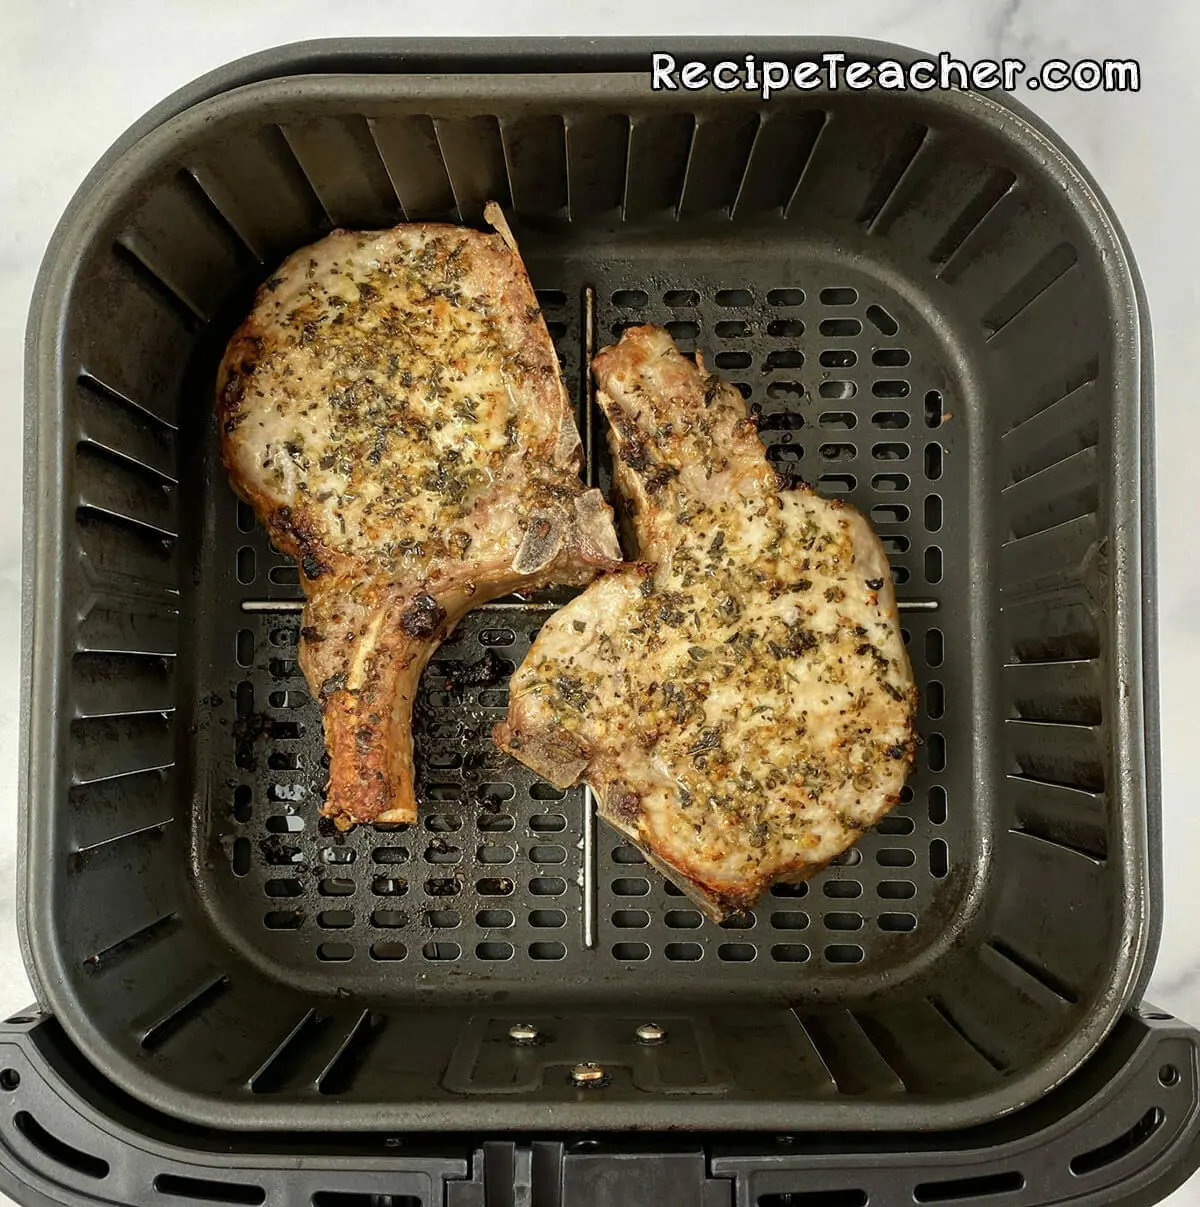 Seasoned thick and juicy pork chops coming out of the air fryer.